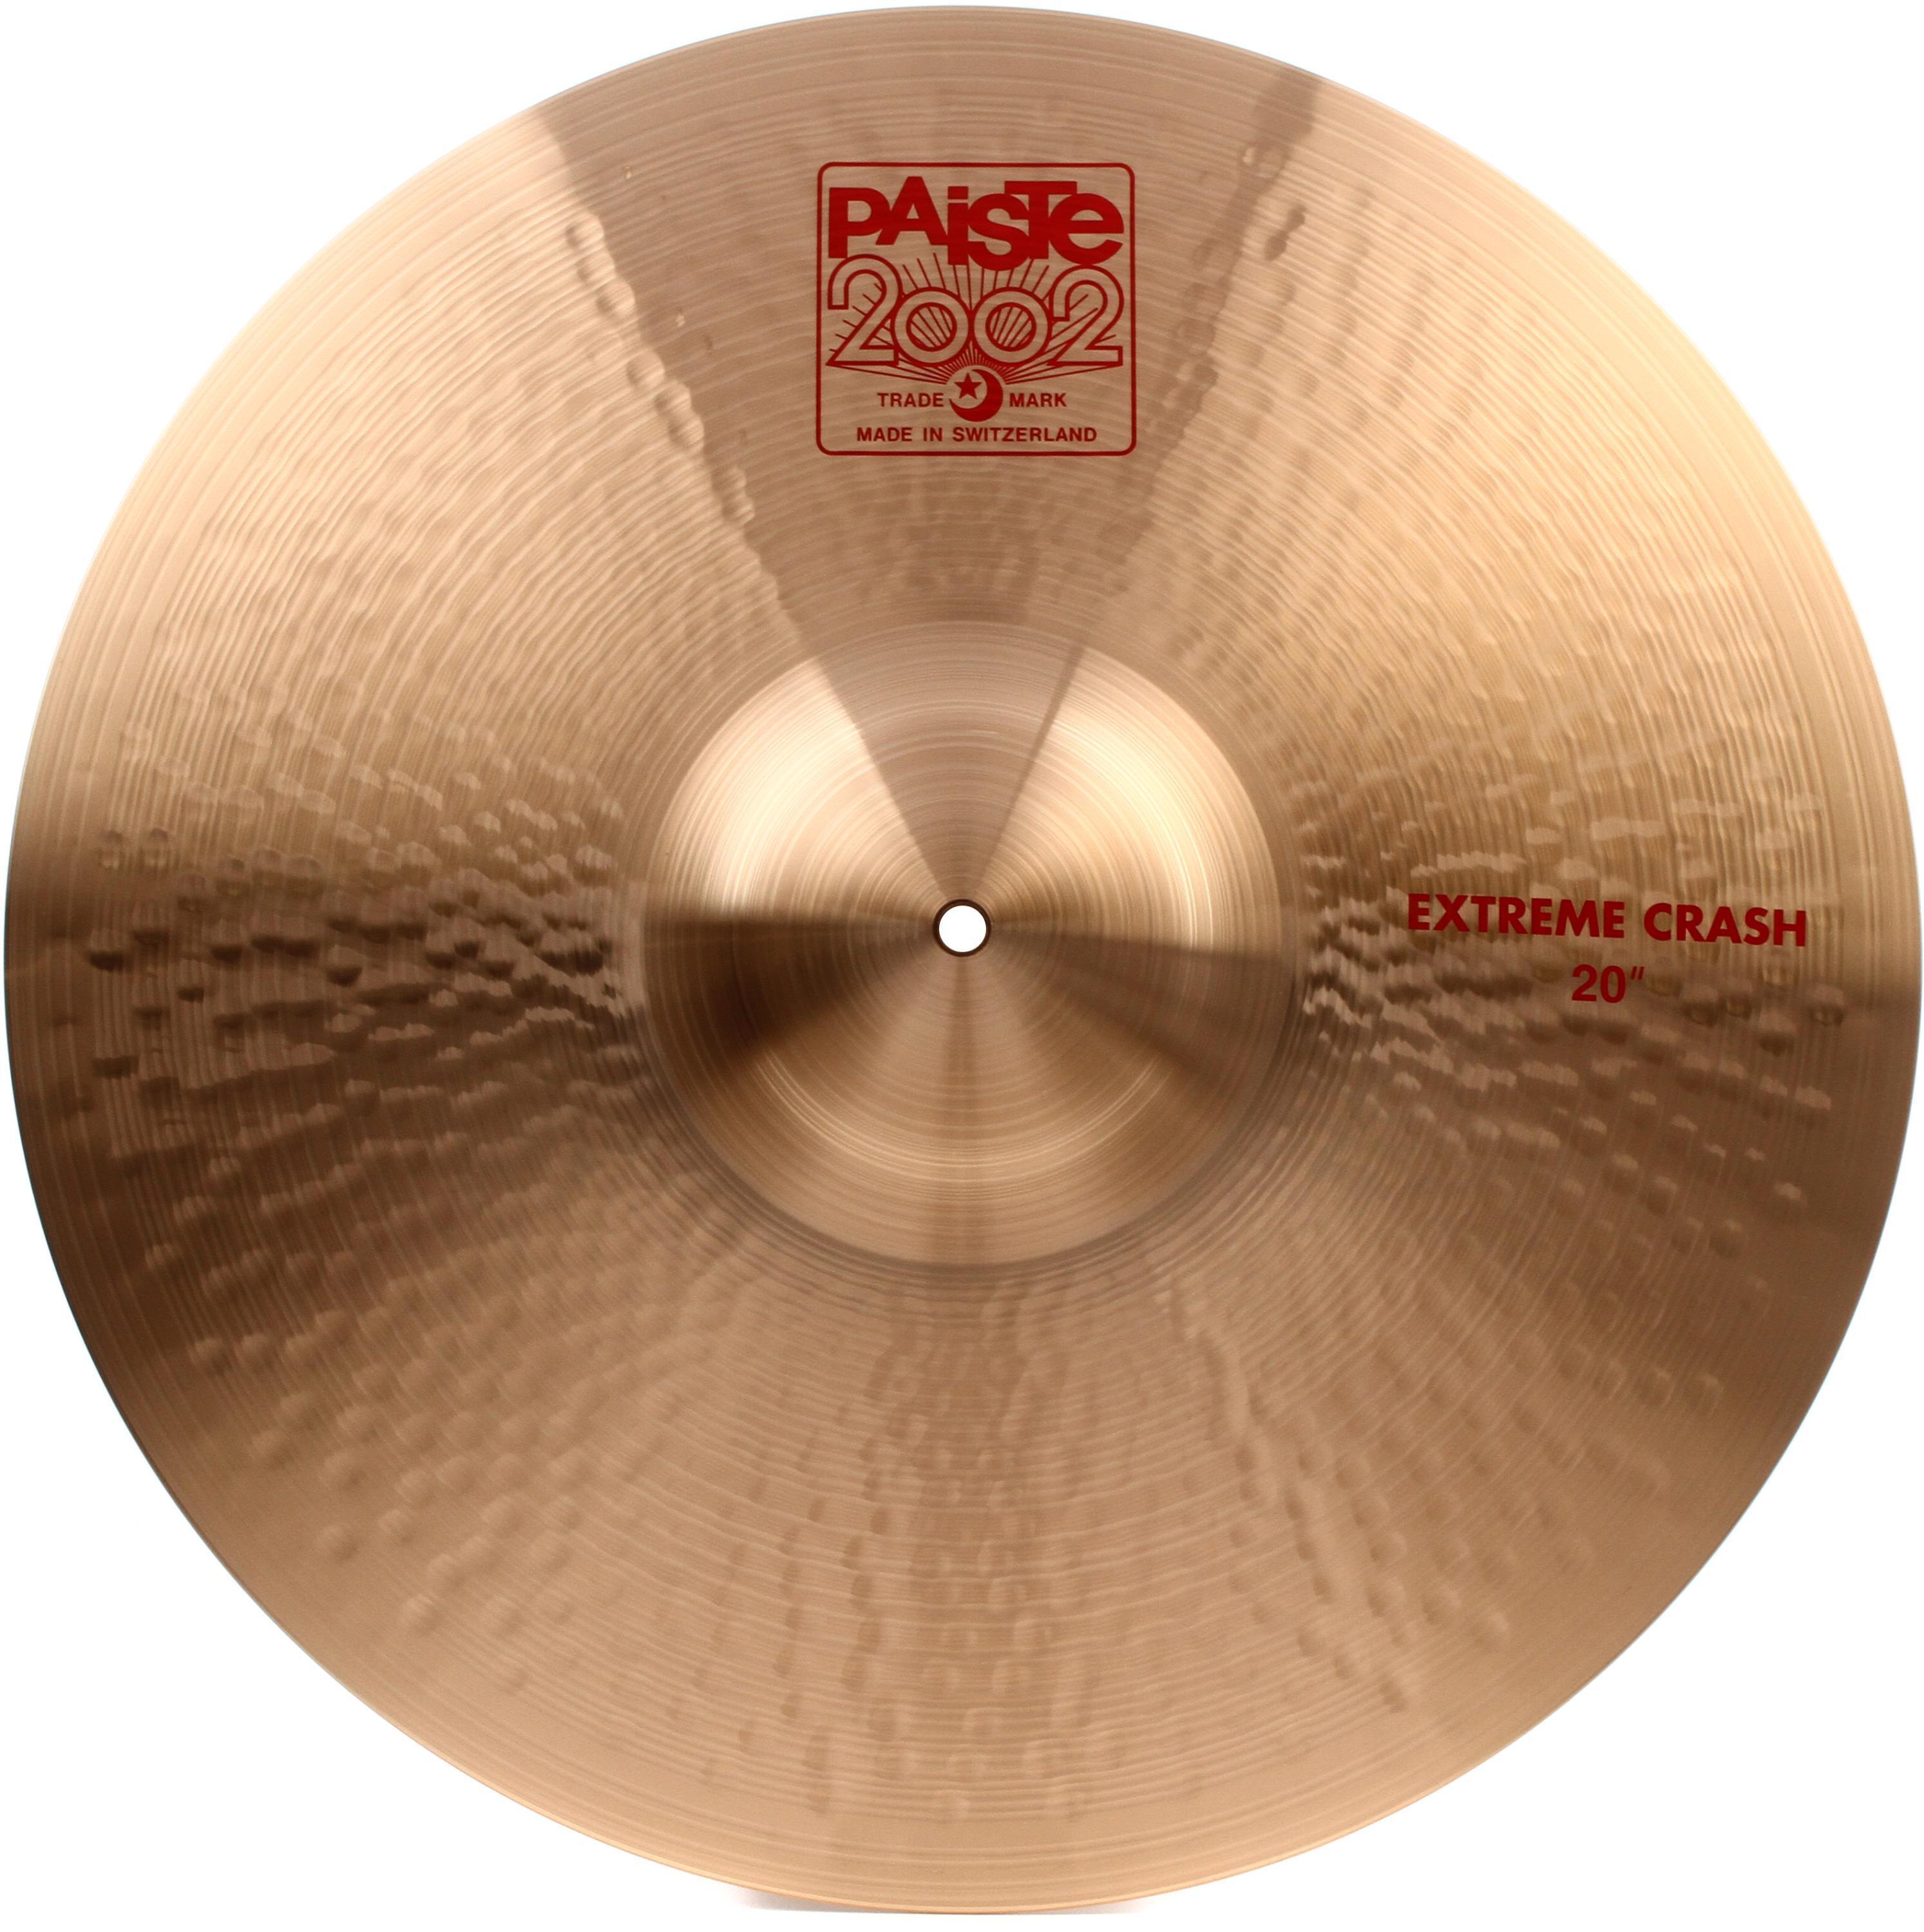 Paiste 2002 Power Crash Cymbal - 20-inch | Sweetwater